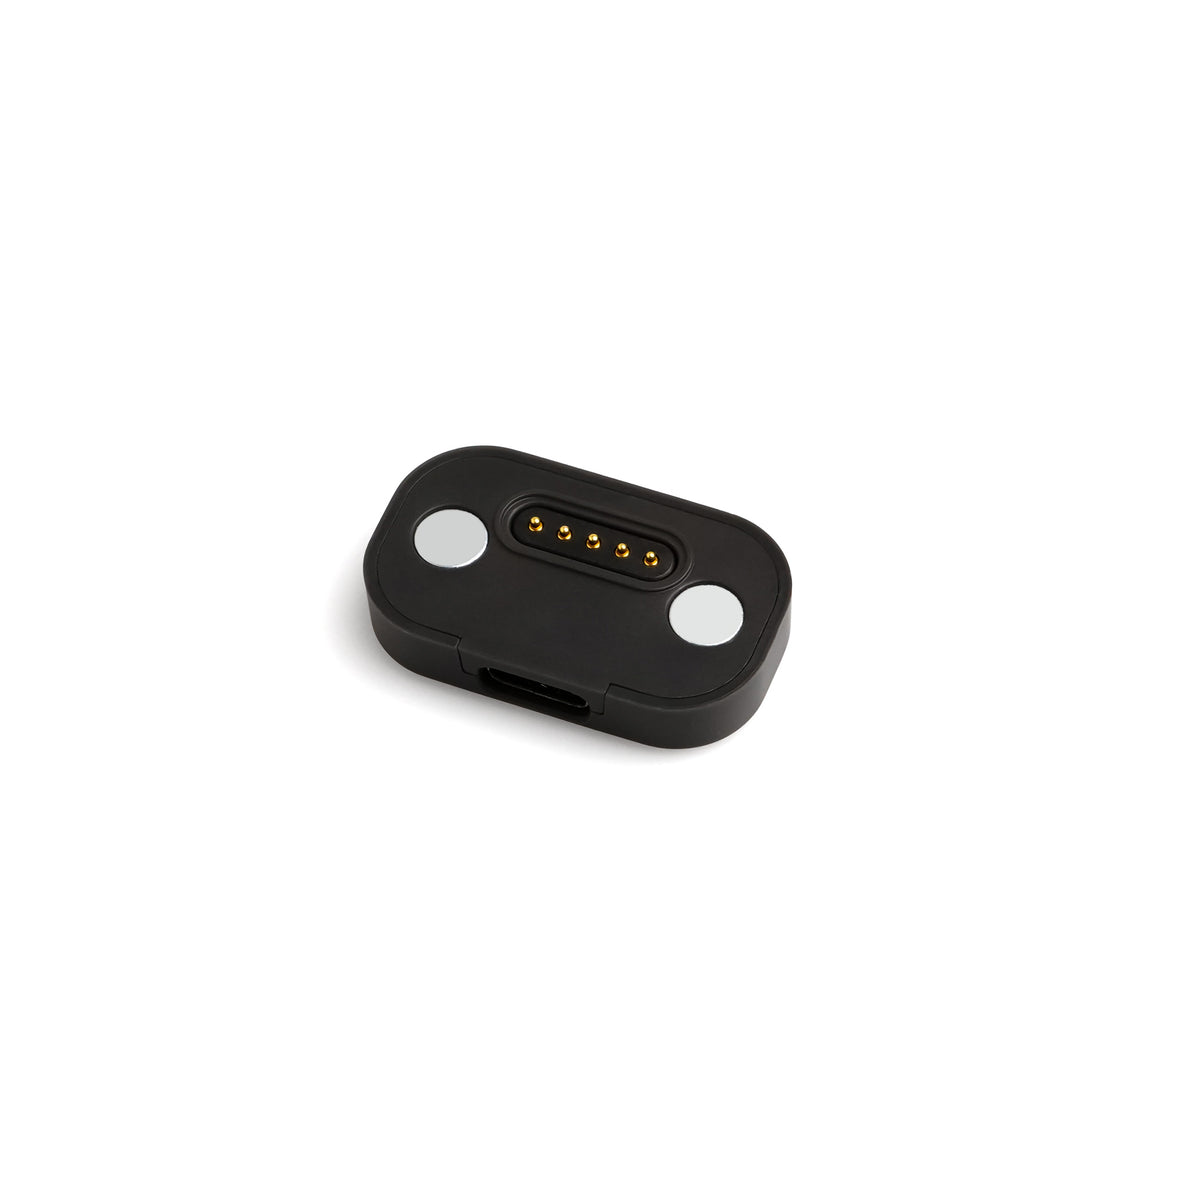 CADDXFPV Walnut Action Camera Magnetic Charging Part